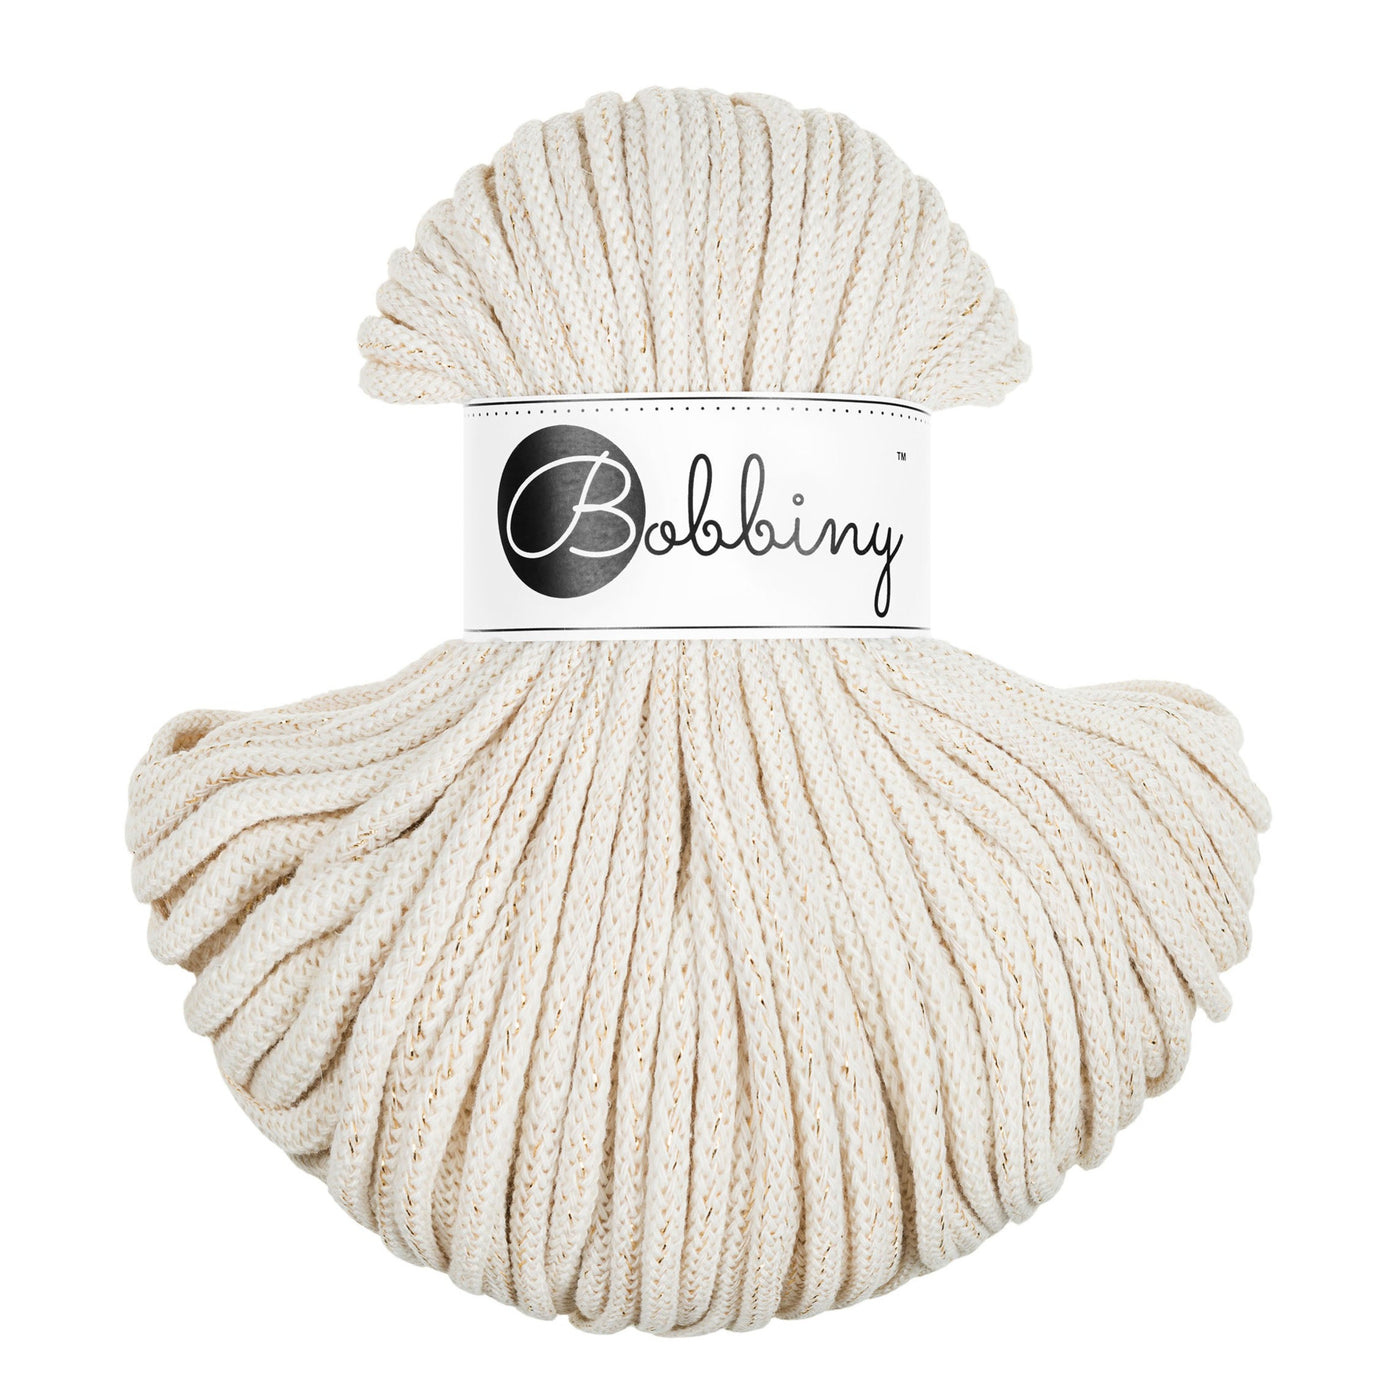 Bobbiny braided cord 5mm 50m in golden natural shade